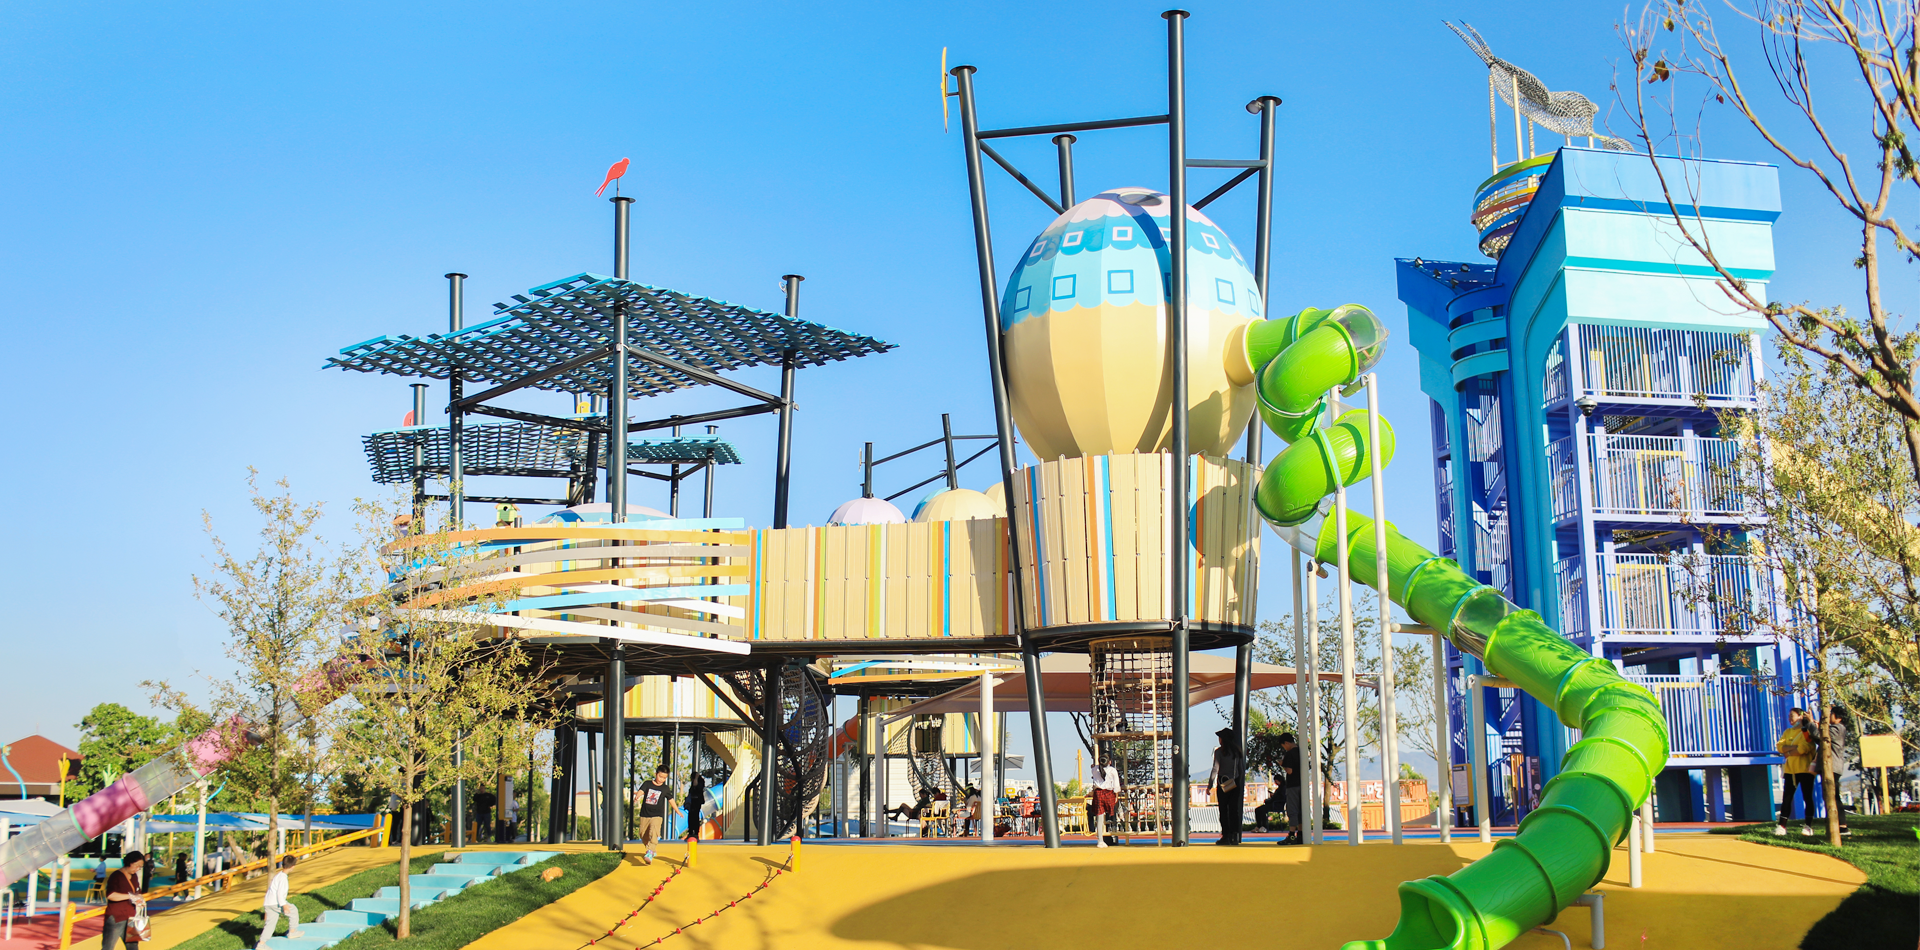 The customized outdoor playground landscape can be designed into different theme according to the customized requirements of integrating into the local culture, diverse IP images and incorporating client's creative ideas.